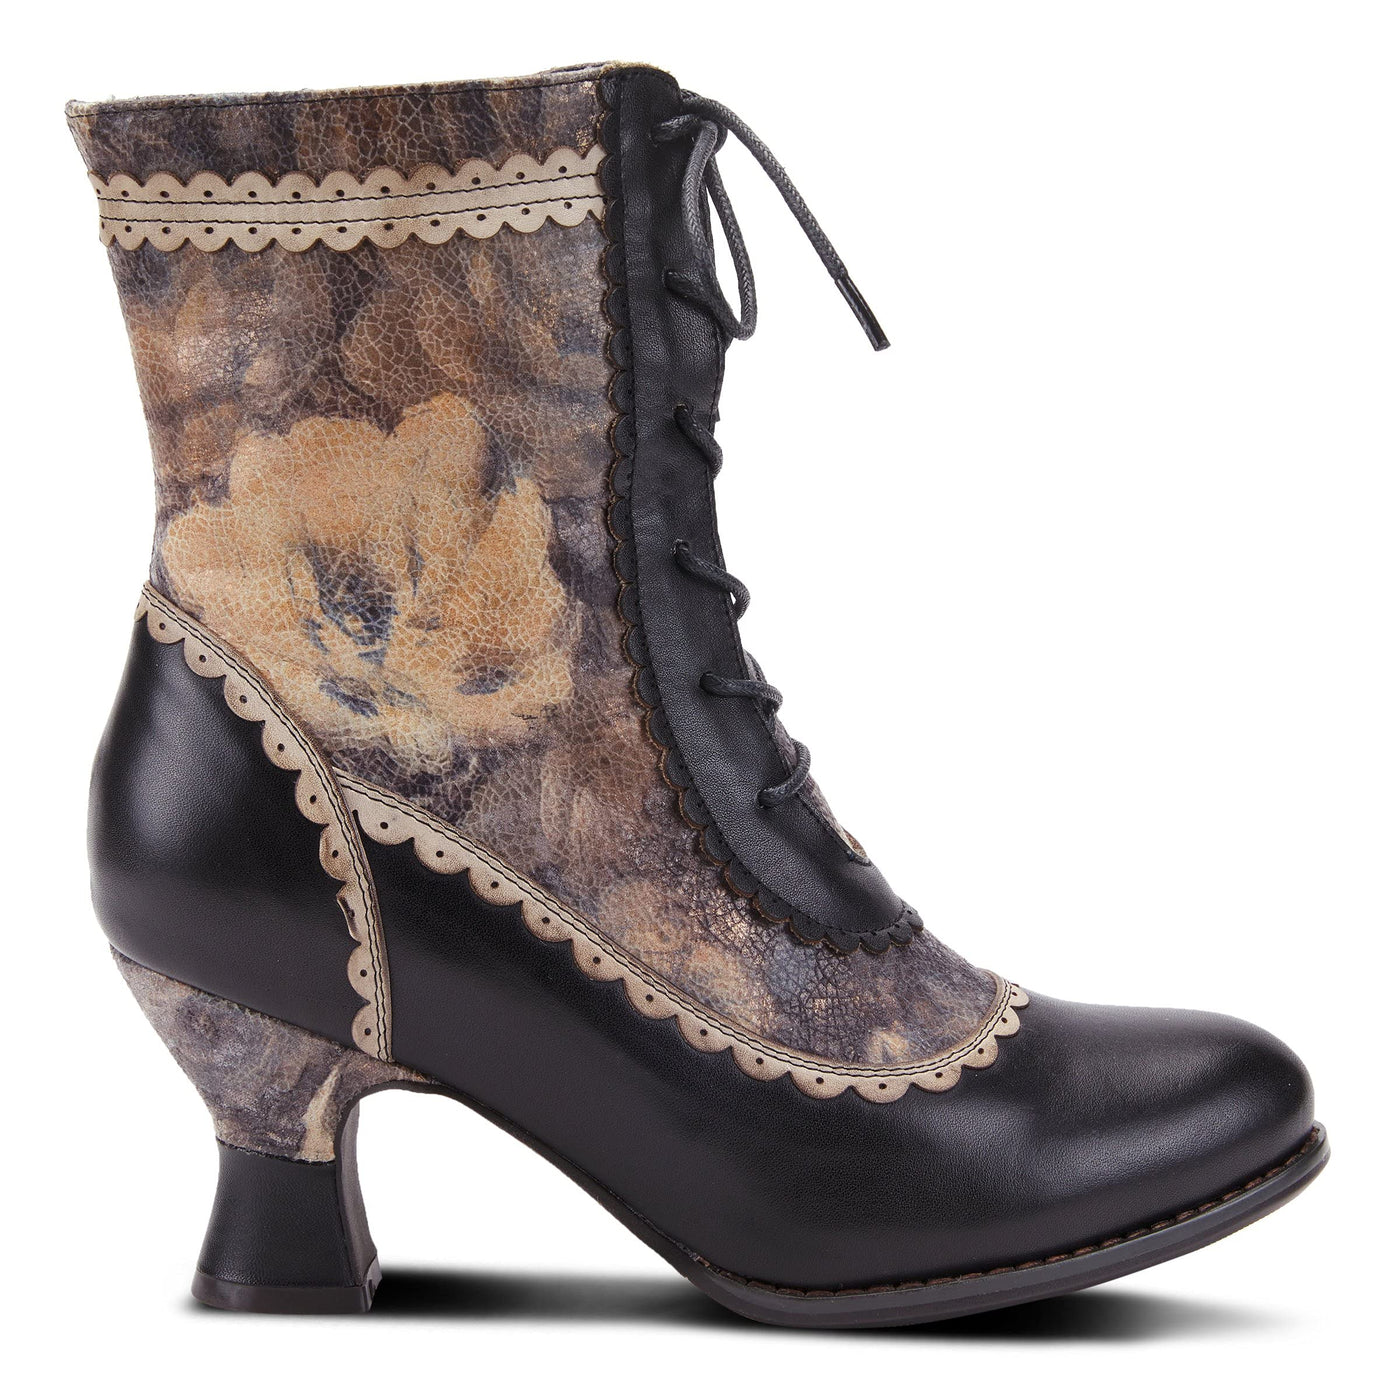 L’Artiste by Spring Step Women's Bewitch-Floral Ankle Boot